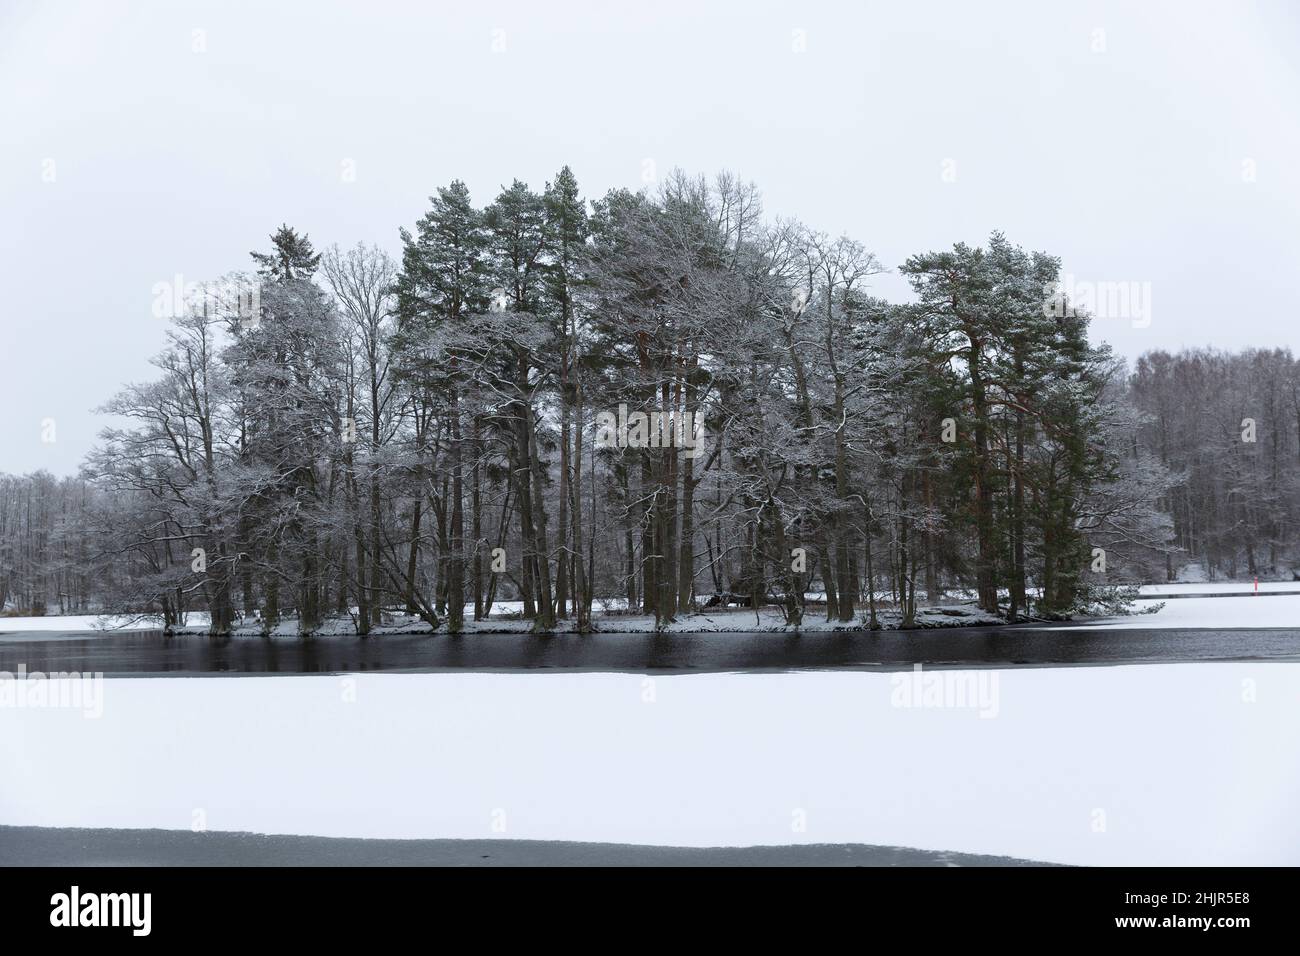 A small island in a lake in winter Stock Photo